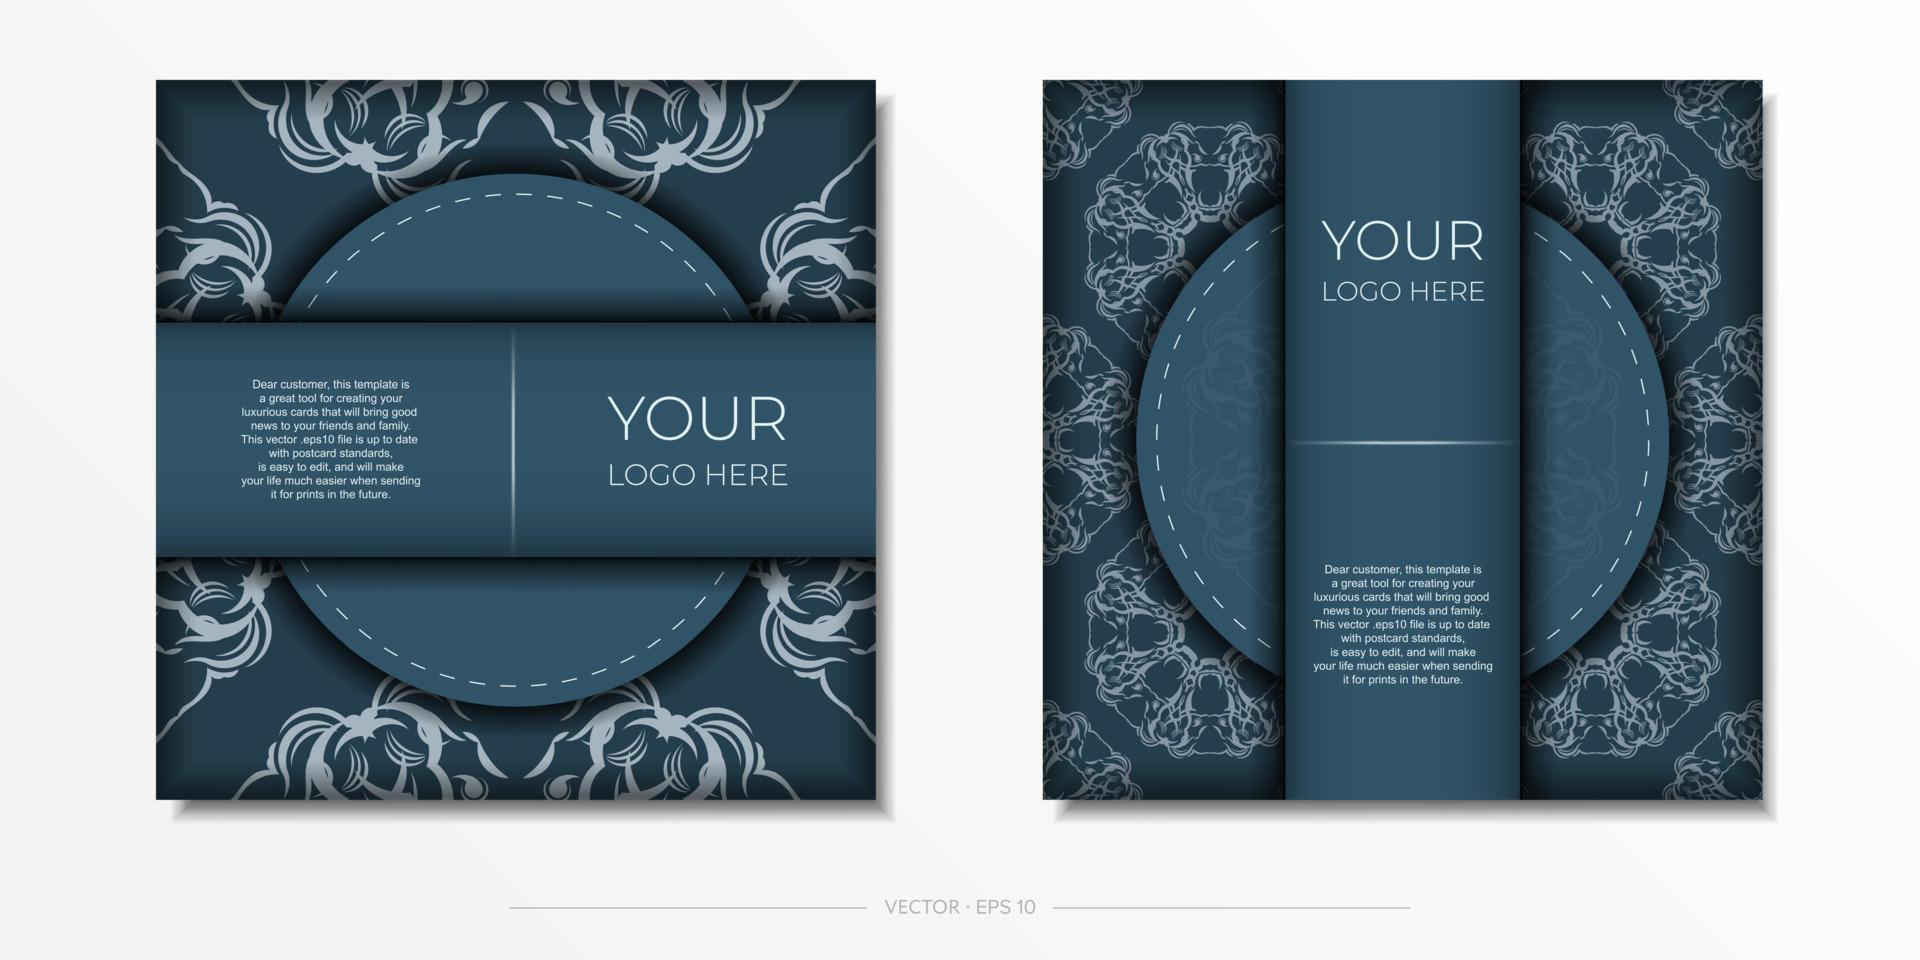 Square vector postcards in blue color with luxury light ornaments. Invitation card design with vintage patterns.